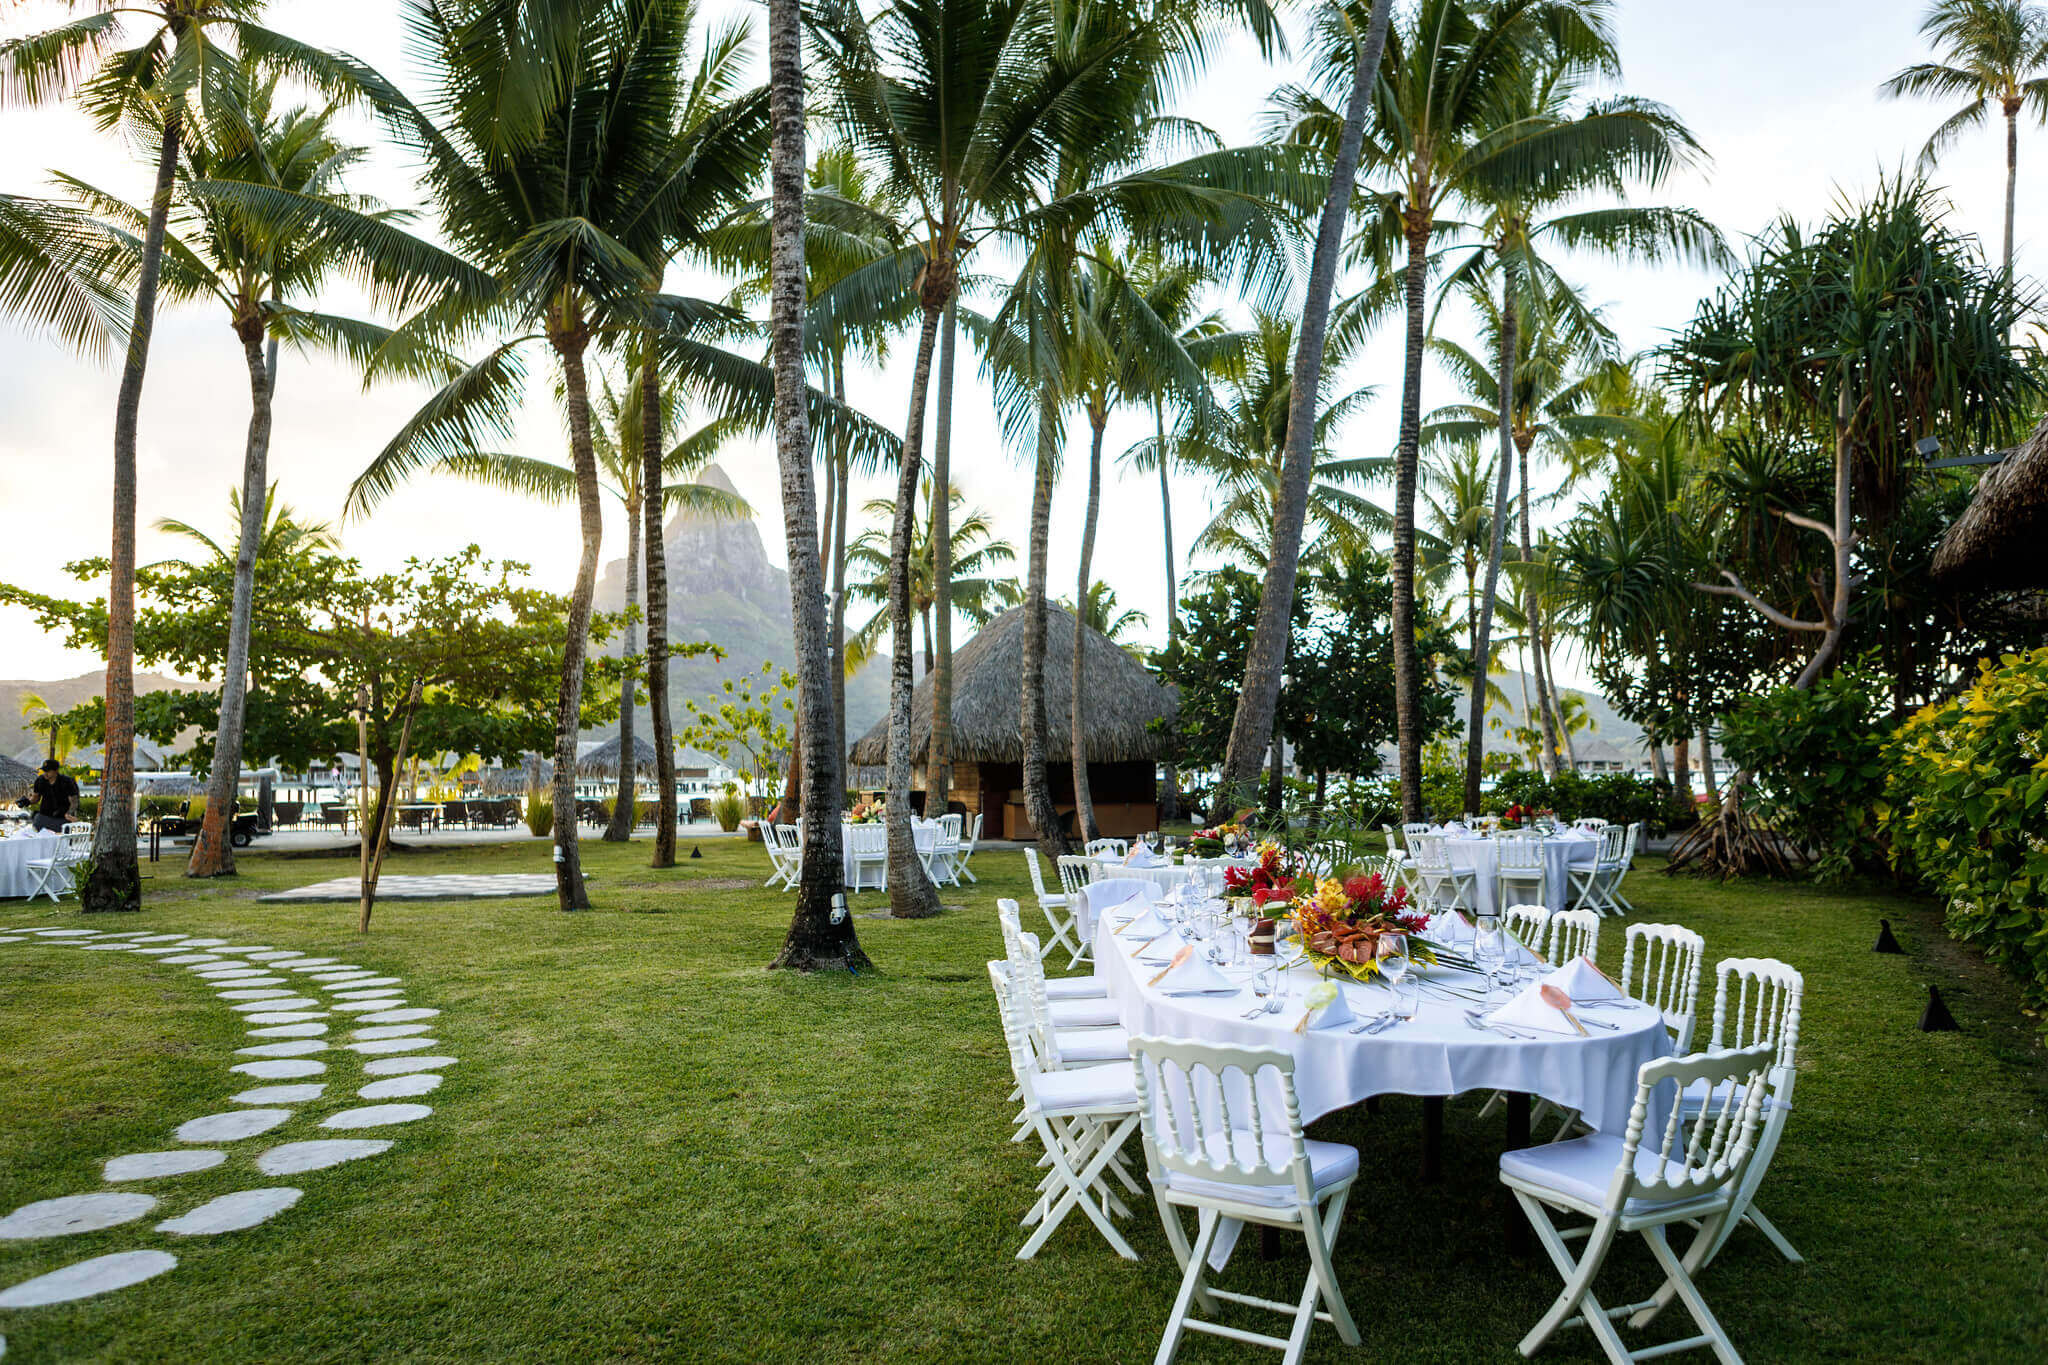 Dining in the Le Corail gardens